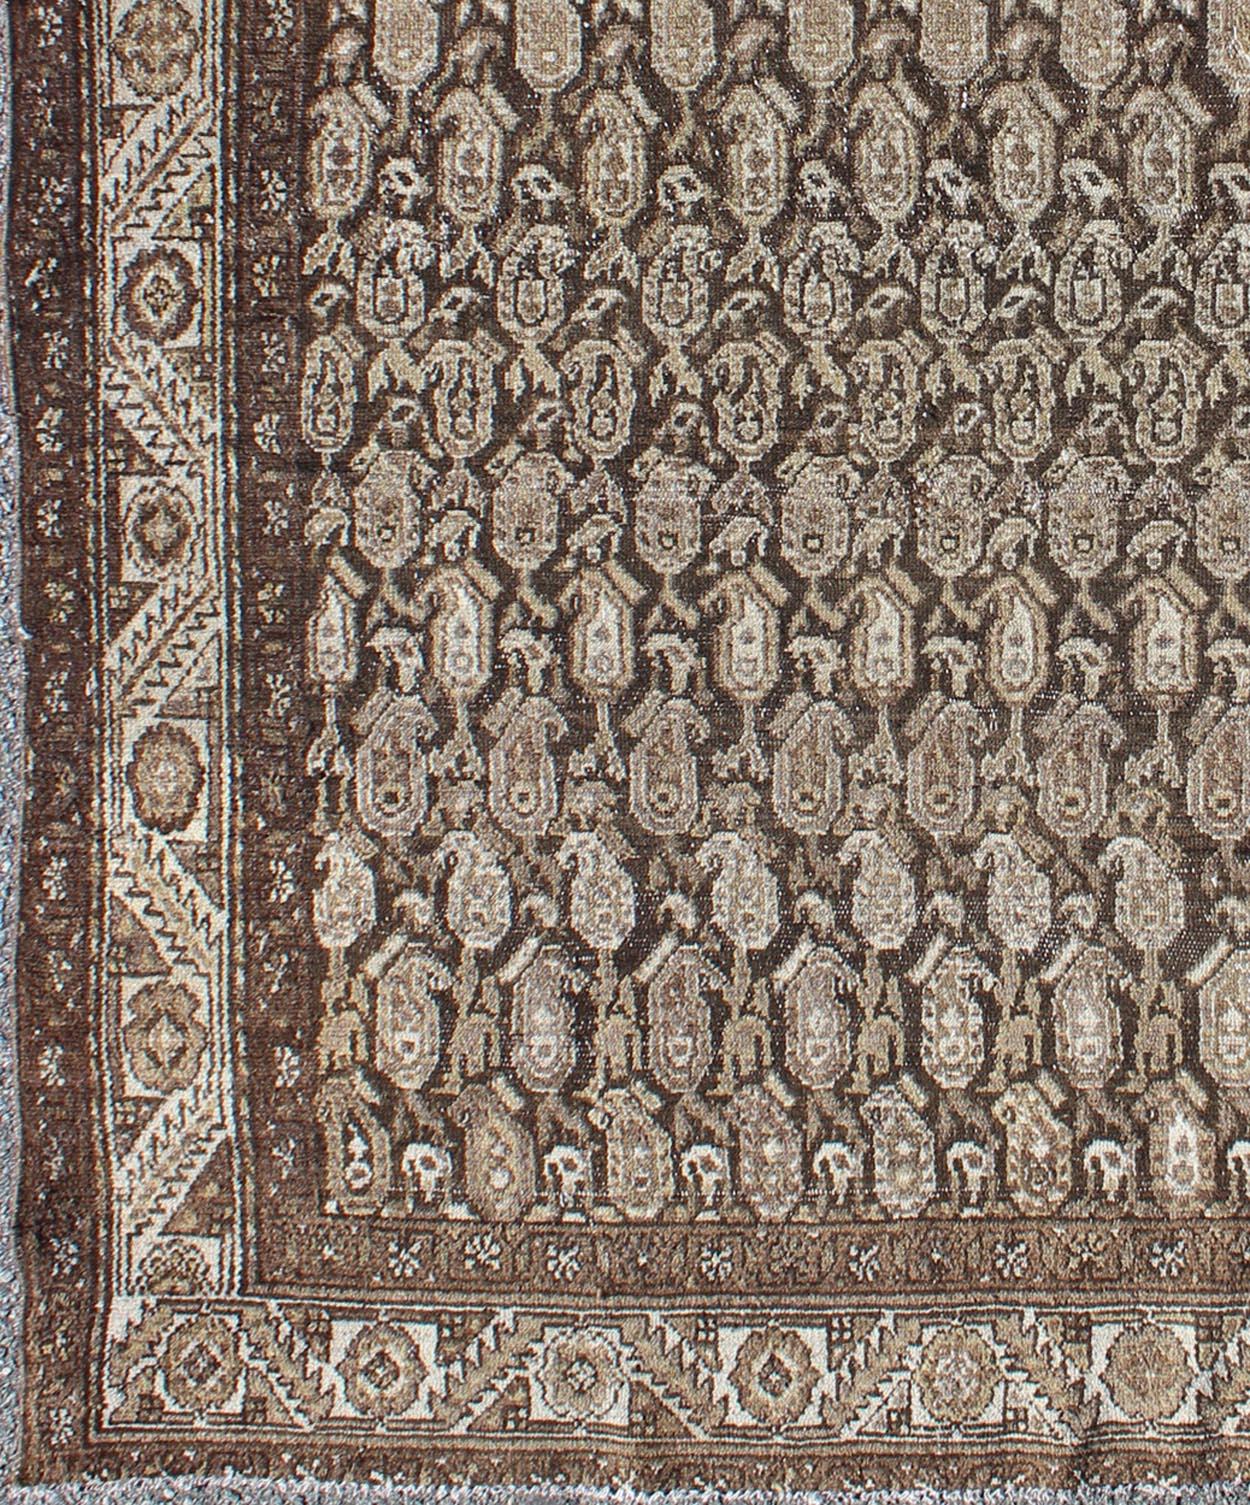 Malayer Antique Persian Seraband Rug with All-Over Tribal Design in Brown's For Sale